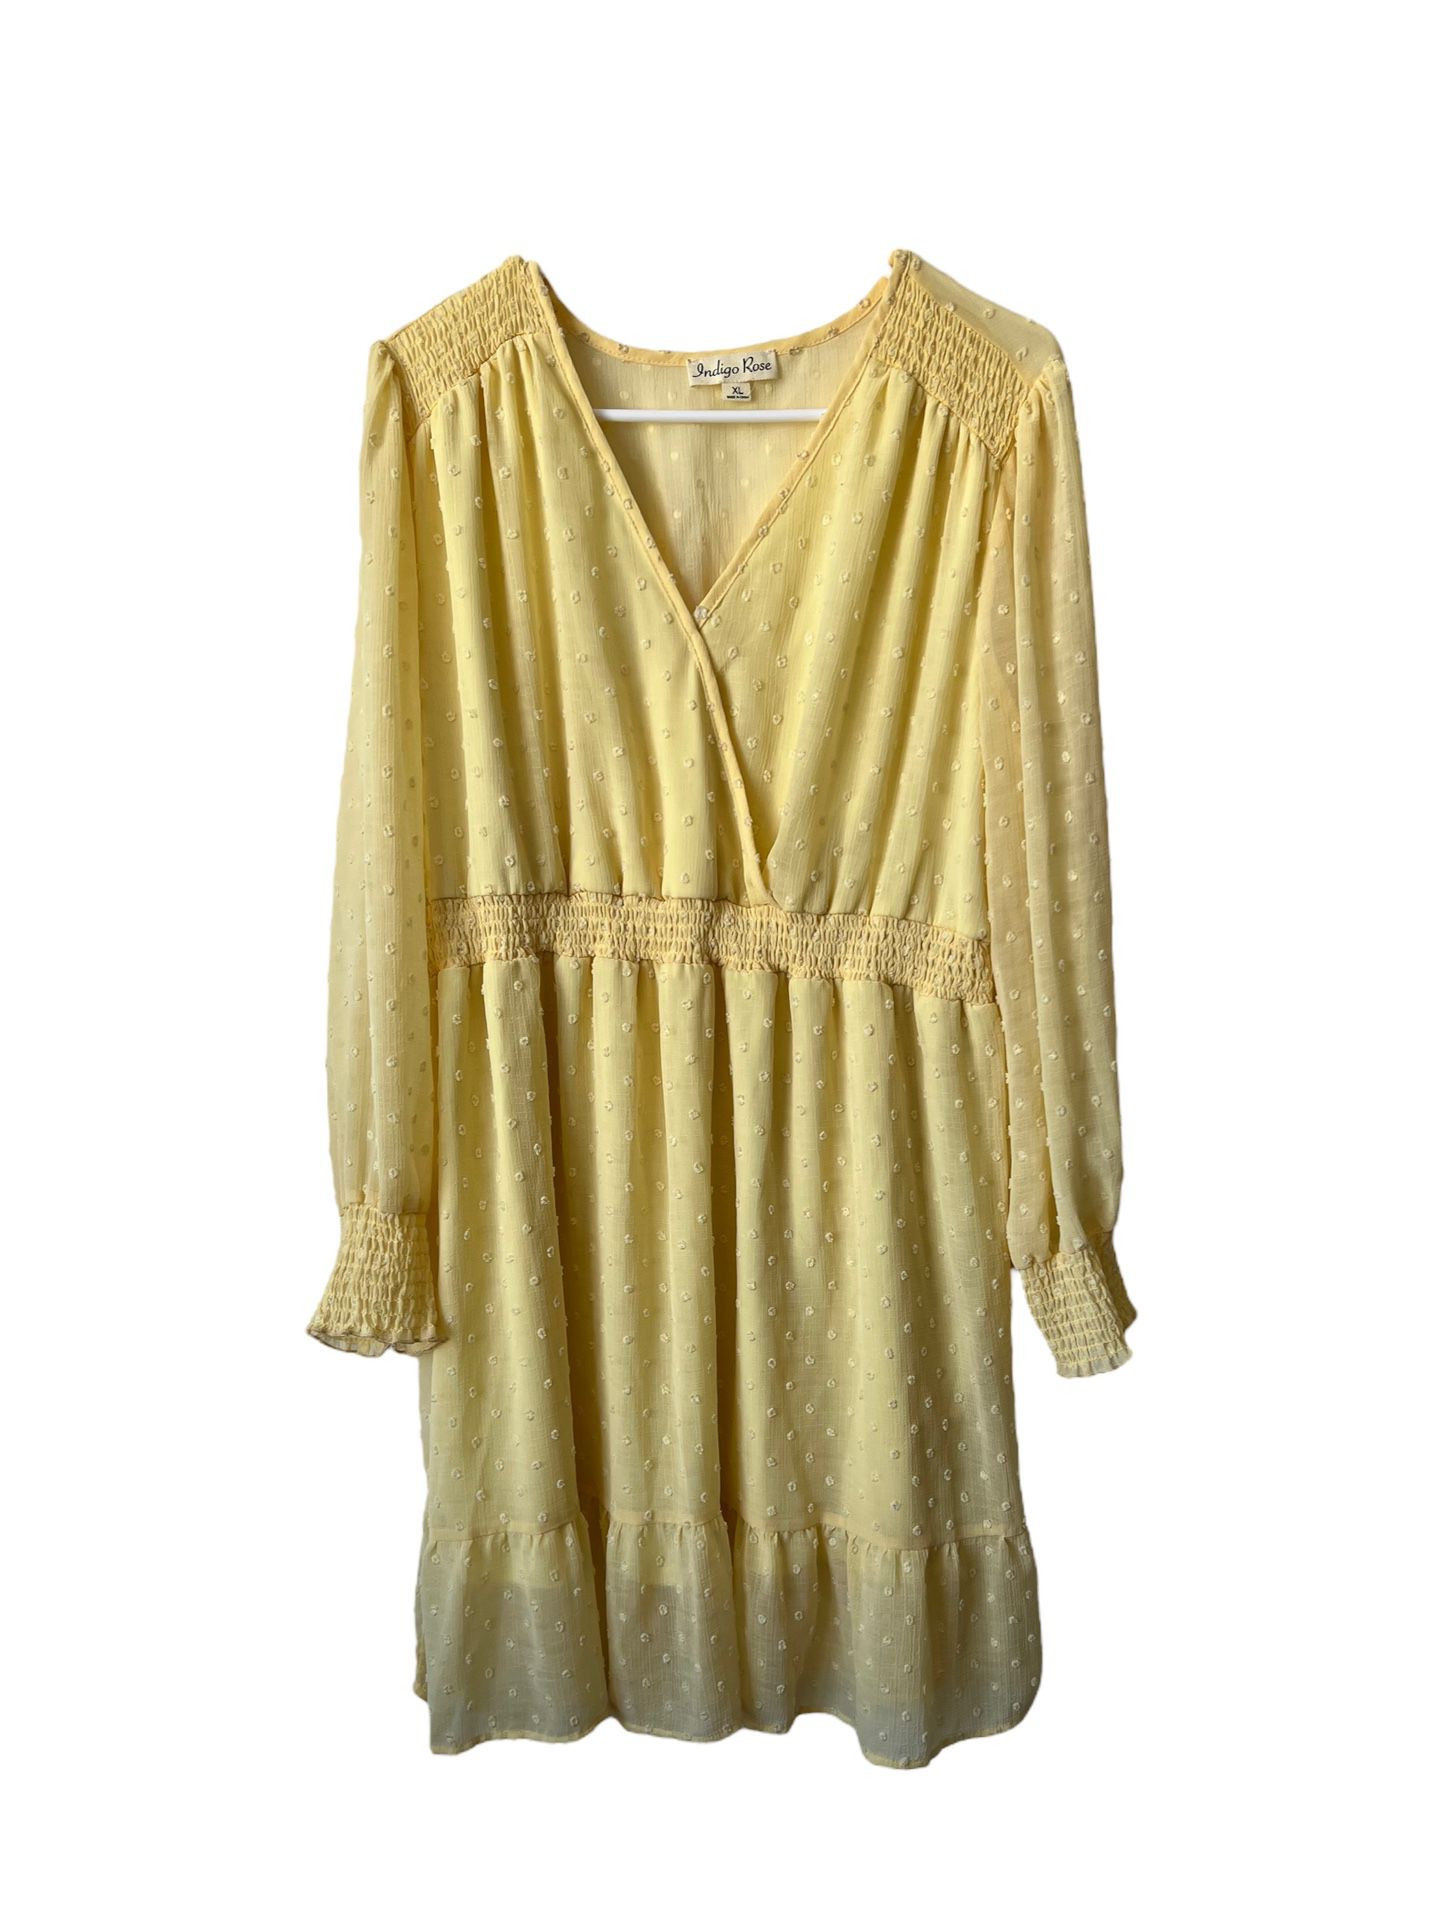 Indigo rose vintage yellow long sleeve dress ruffle polyester circle linen XL The dress is a pale yellow elastic decor on shoulder and waist has elast